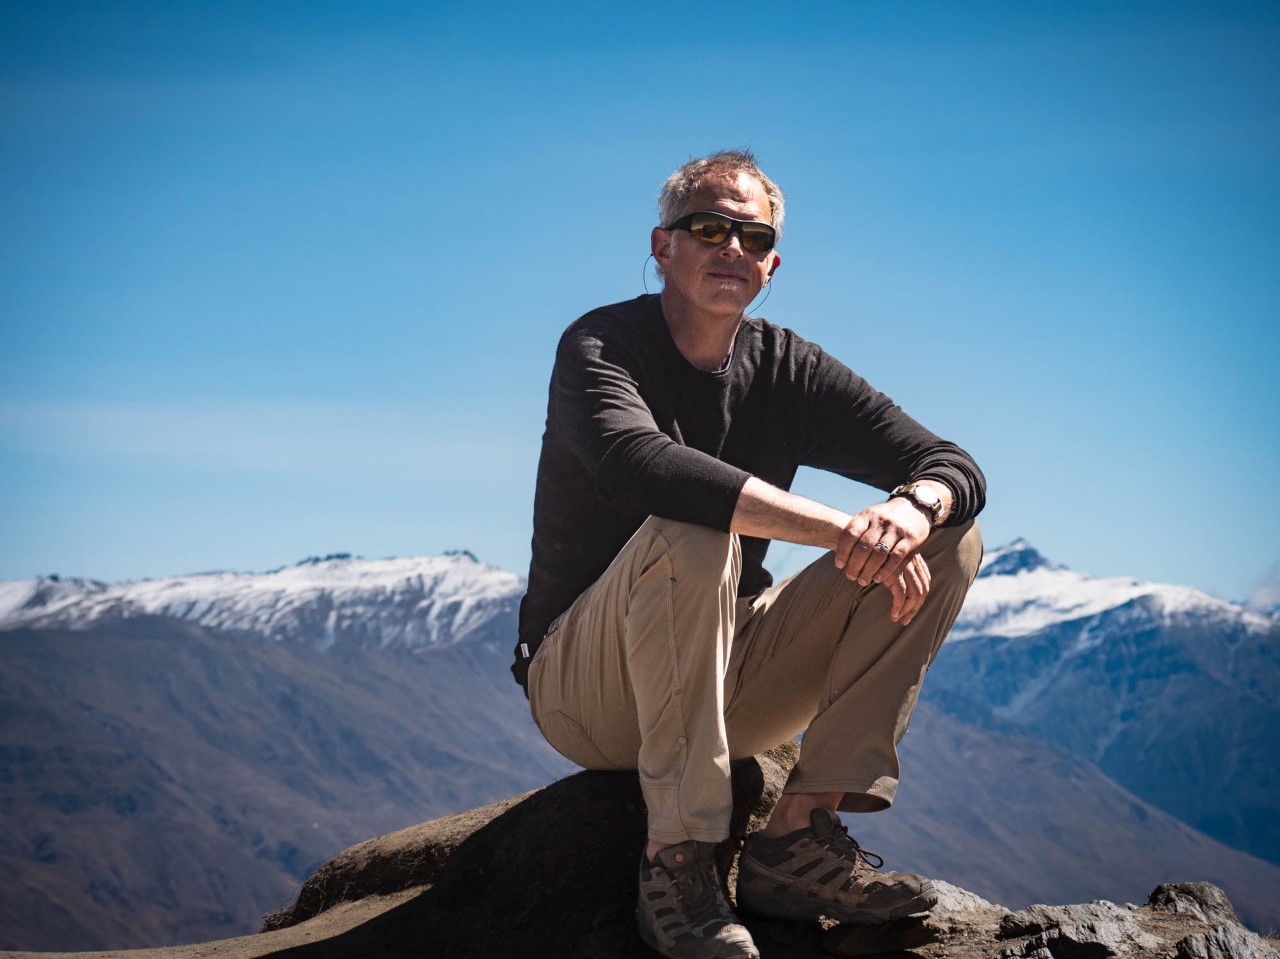 Crouching man on mountain peak in khaki pants, dark longsleeve short, arms perched on knees, wearing sunglasses. The background is a series of snowcapped mountain peaks